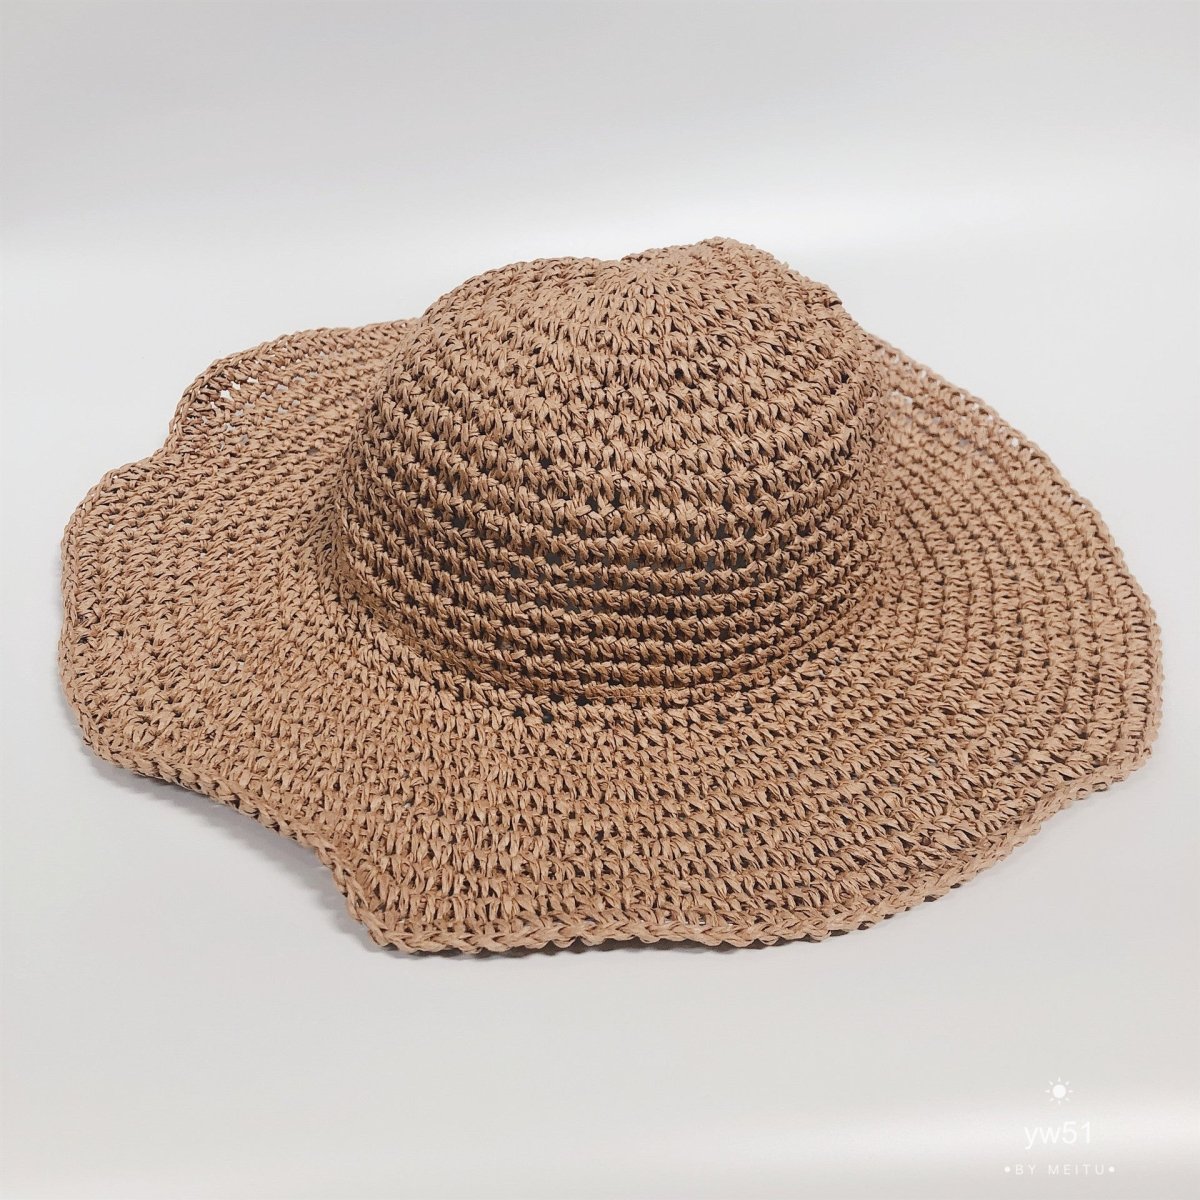 Foldable Straw Sun Hat for Women | Summer Beach Holiday Cool Hat | TrendyAffordables - TrendyAffordables - 0